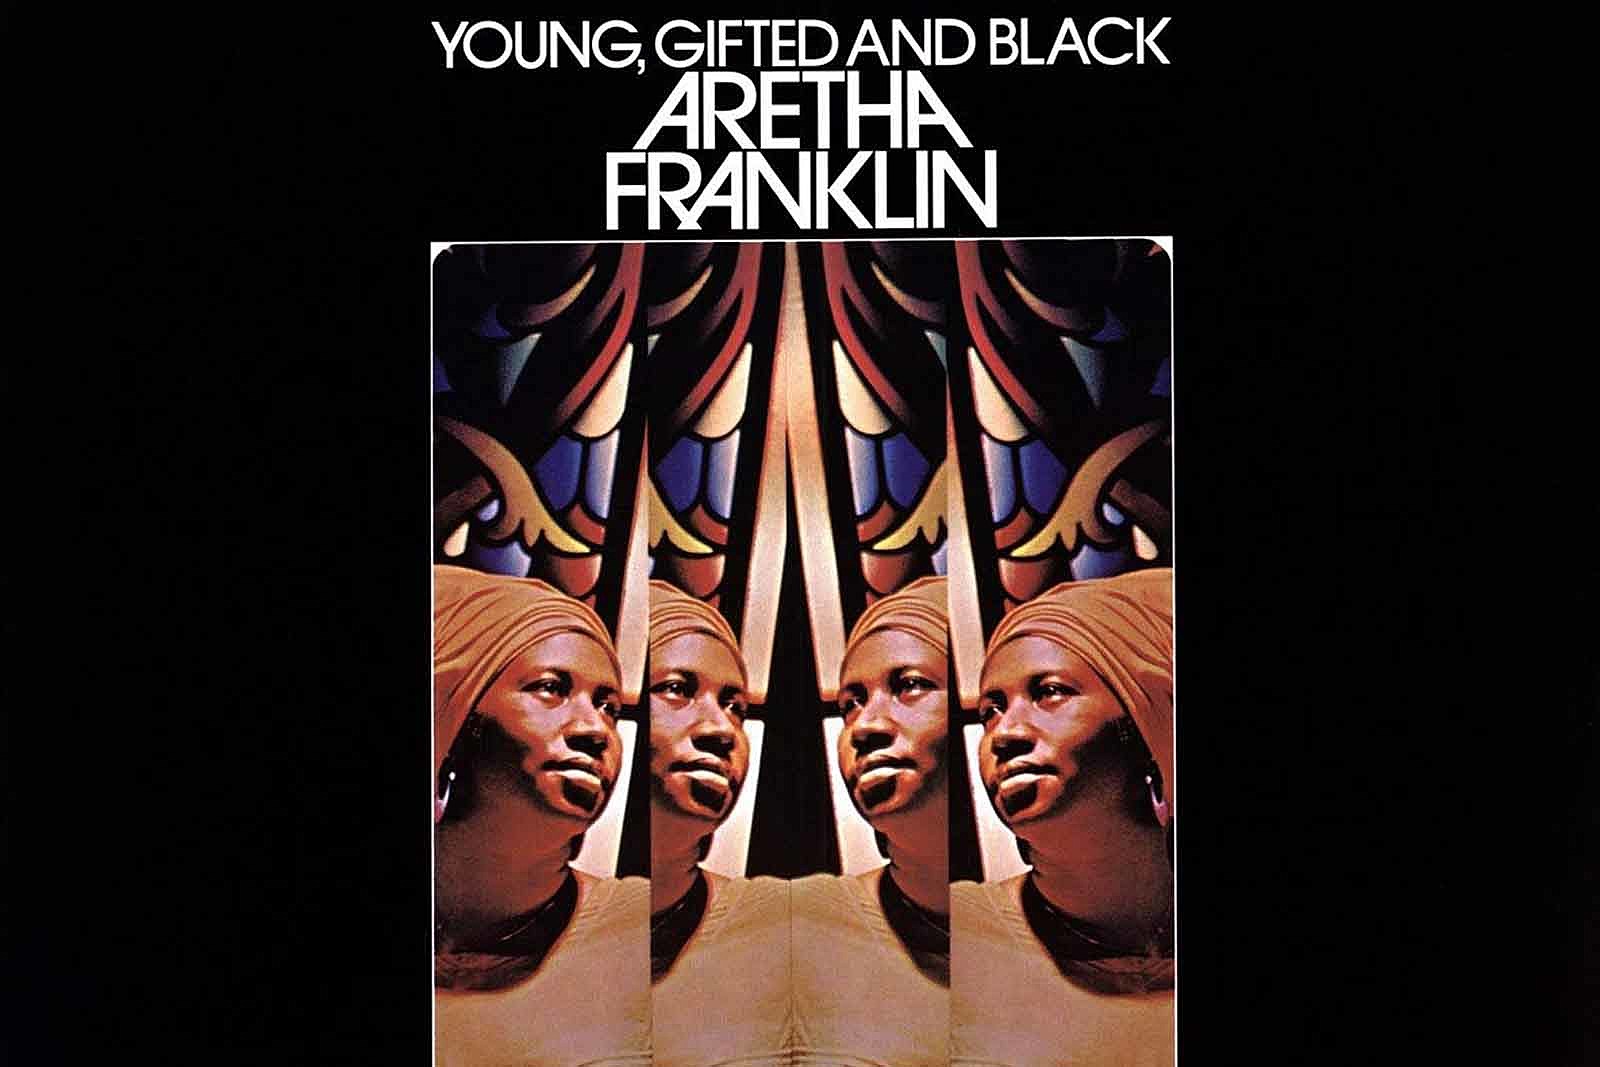 How Aretha Franklin Showed Her Range on 'Young, Gifted and Black'